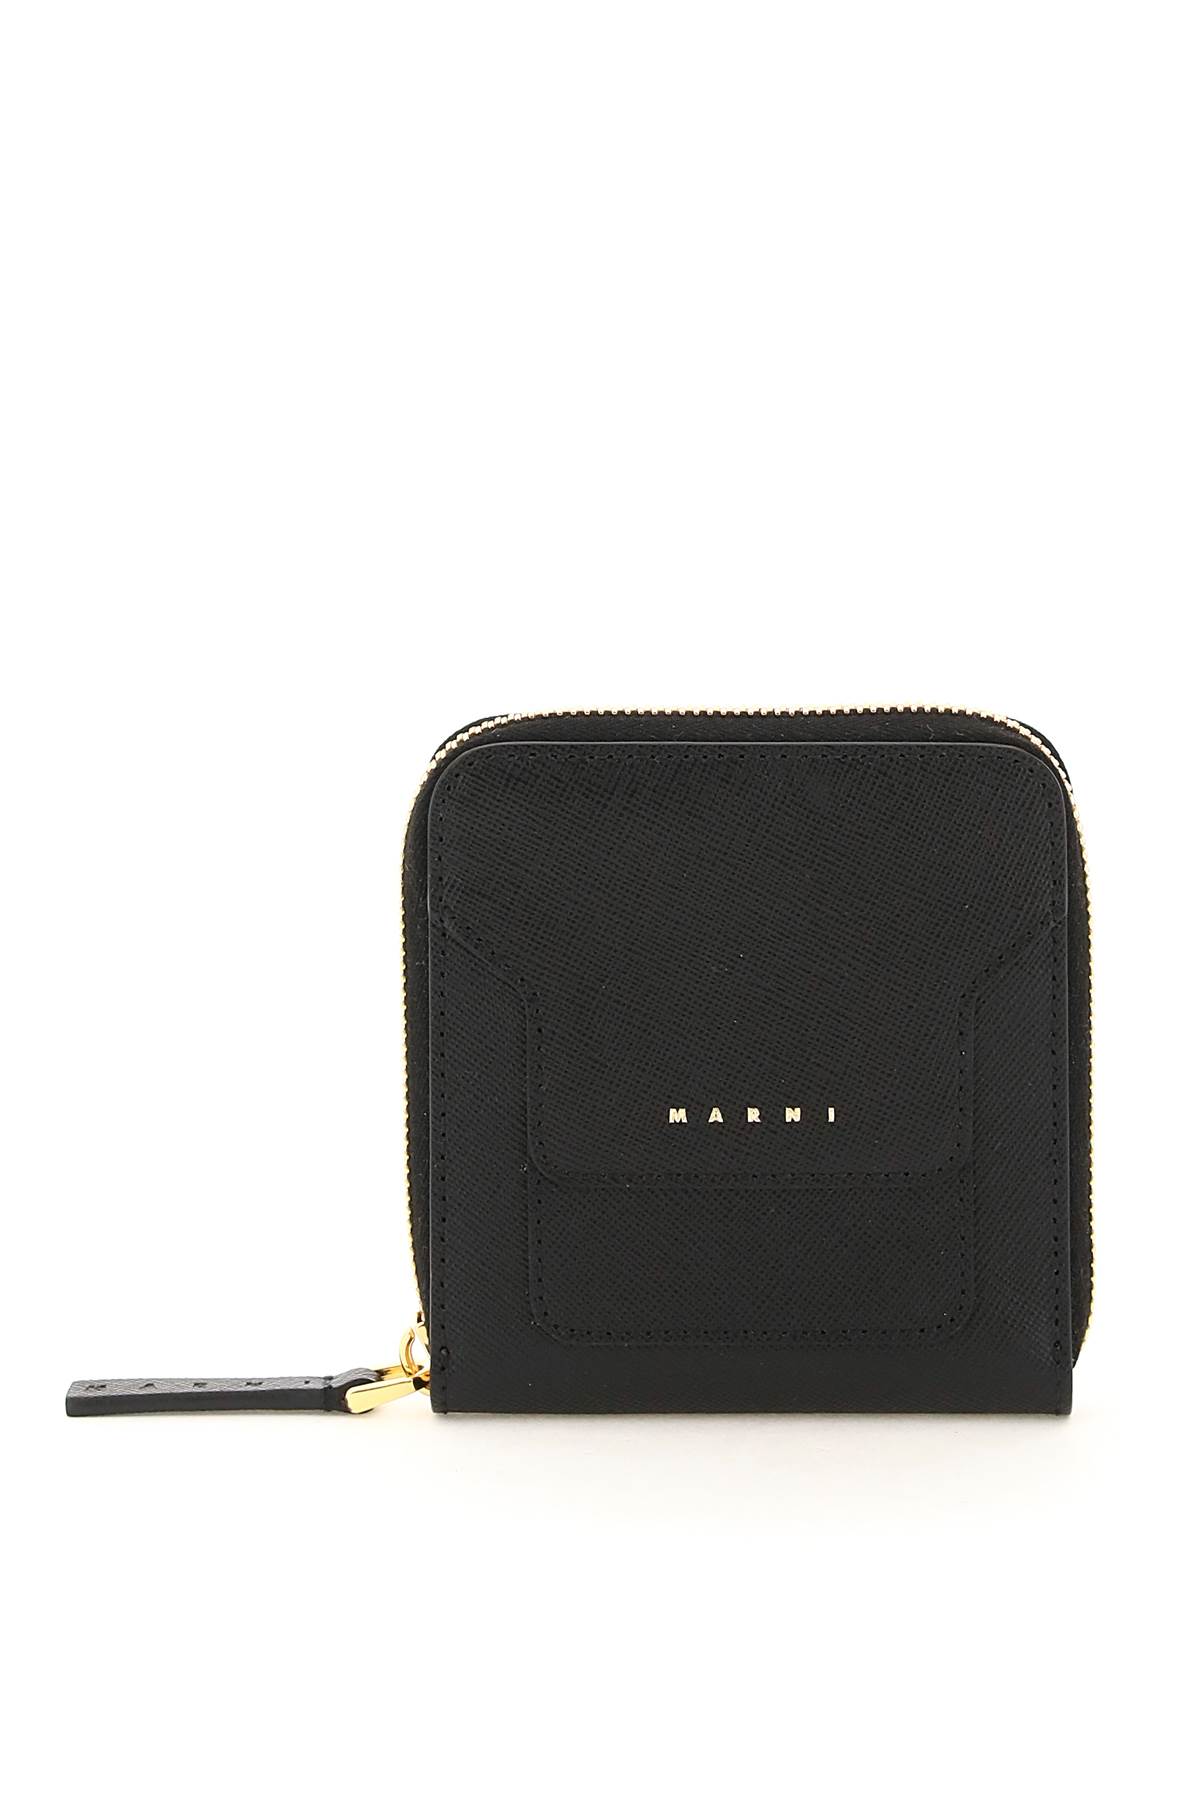 Marni Squared Zip-around Leather Wallet